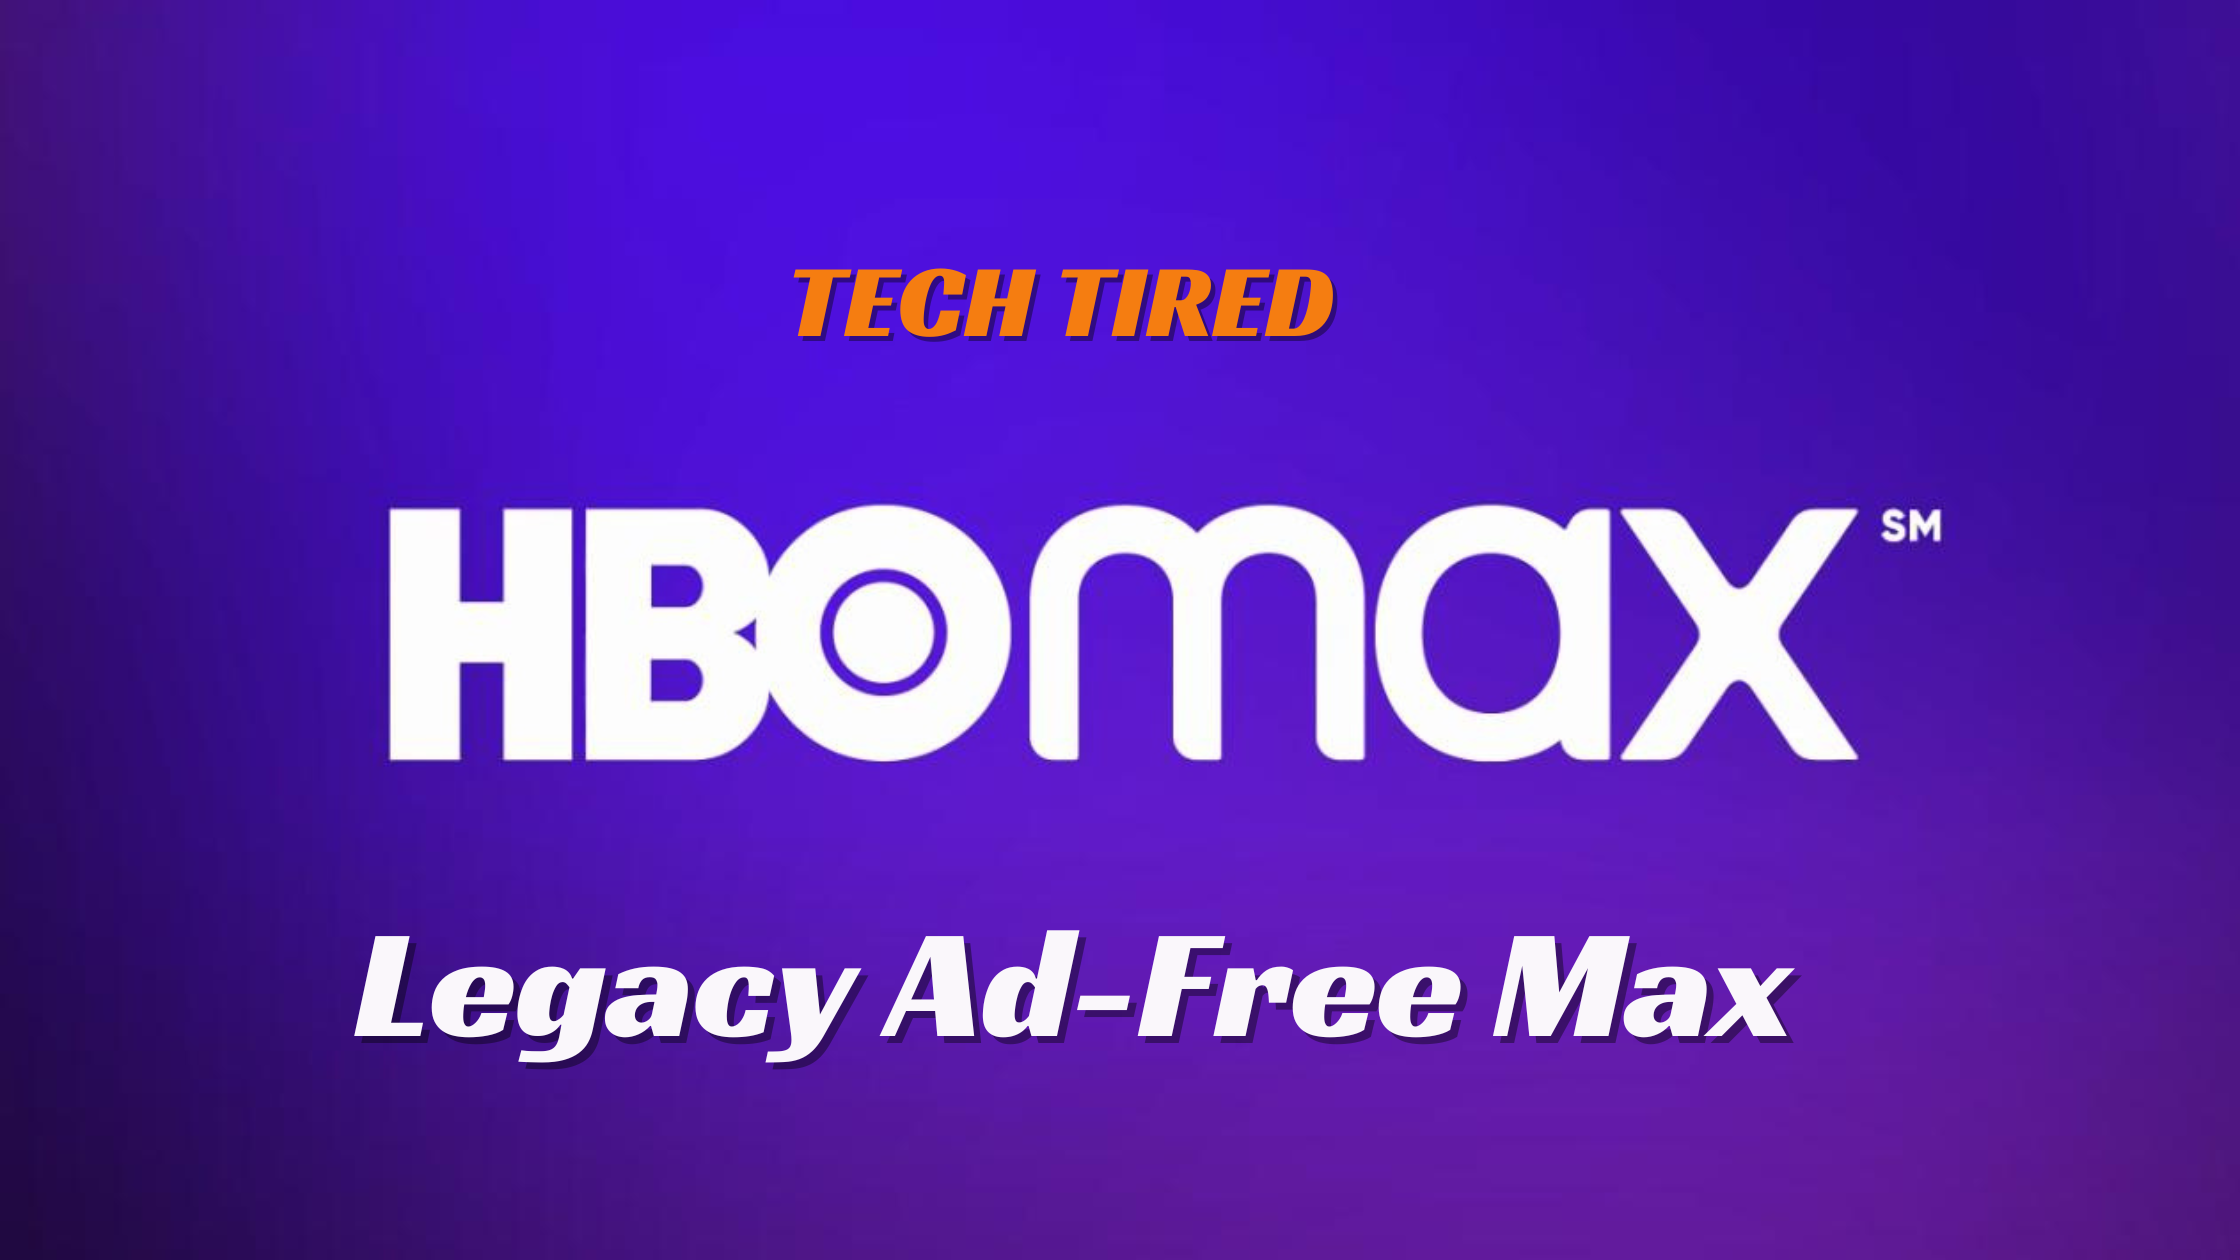 Legacy Ad-Free Max: Changes and Implications for Subscribers